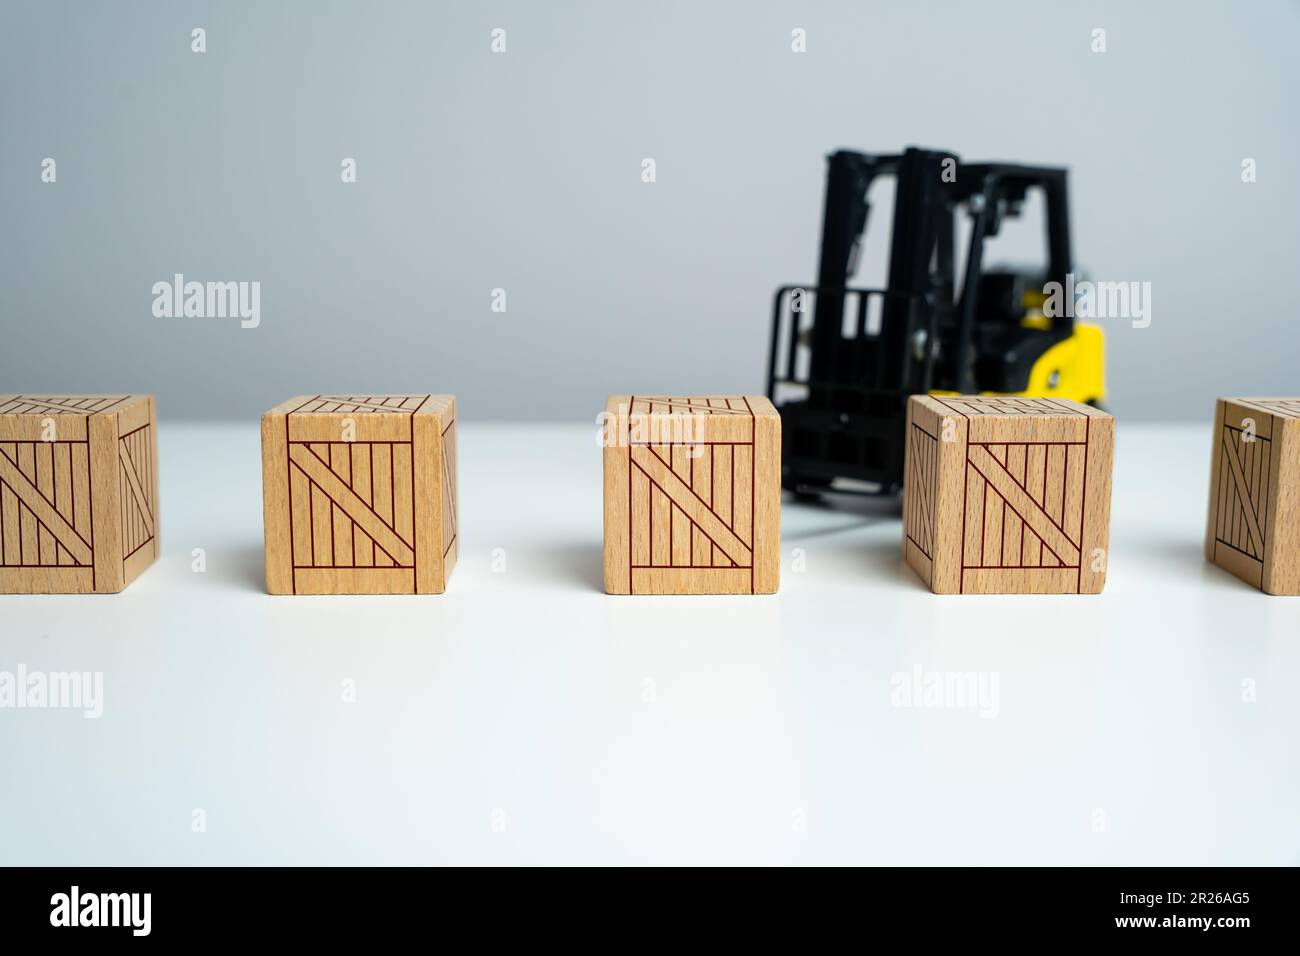 Wooden crates and forklift. Production and freight of goods. Transport department. Effective logistics and supply chain management in delivery of good Stock Photo